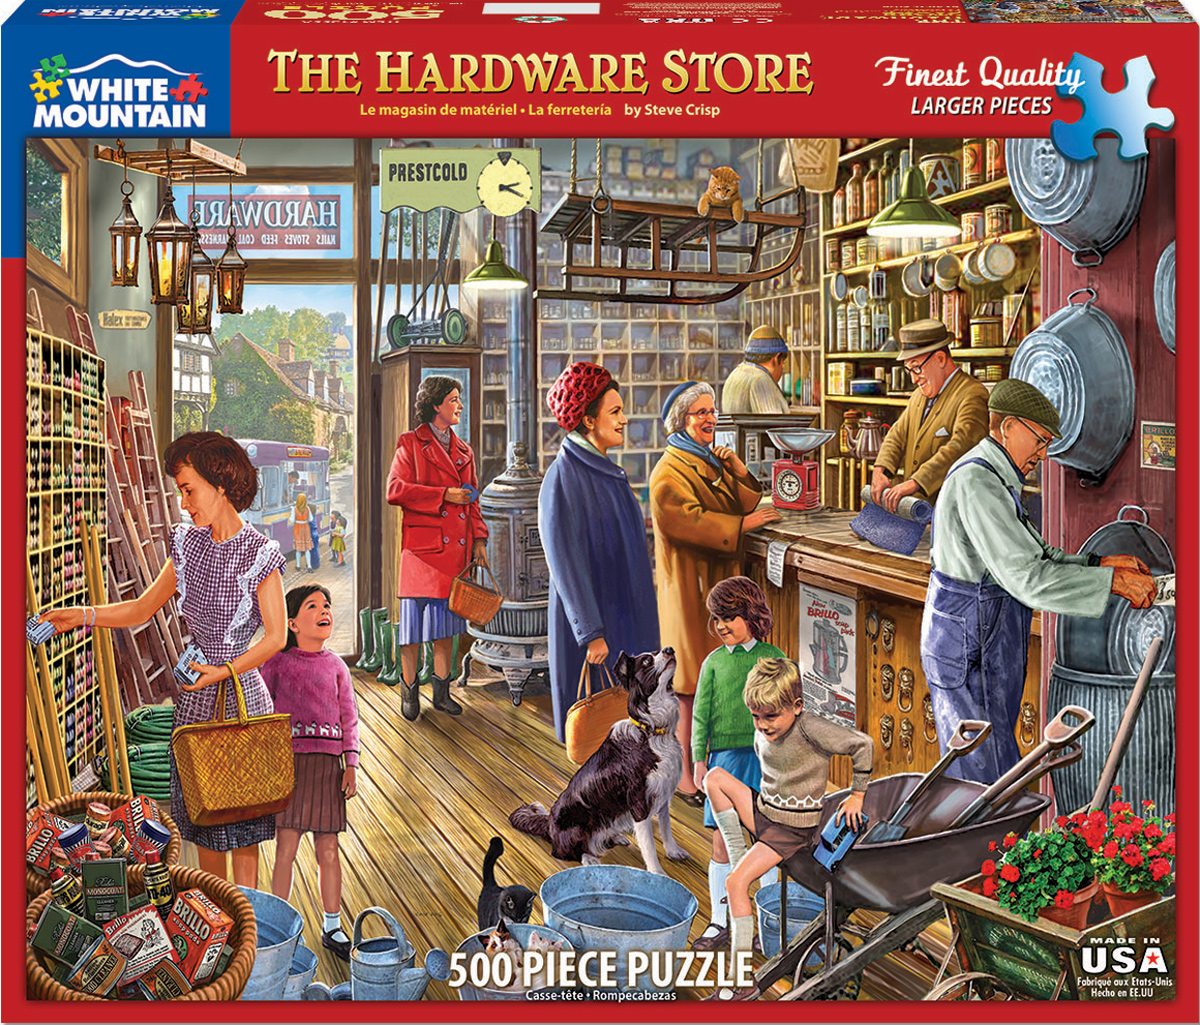 The Hardware Store